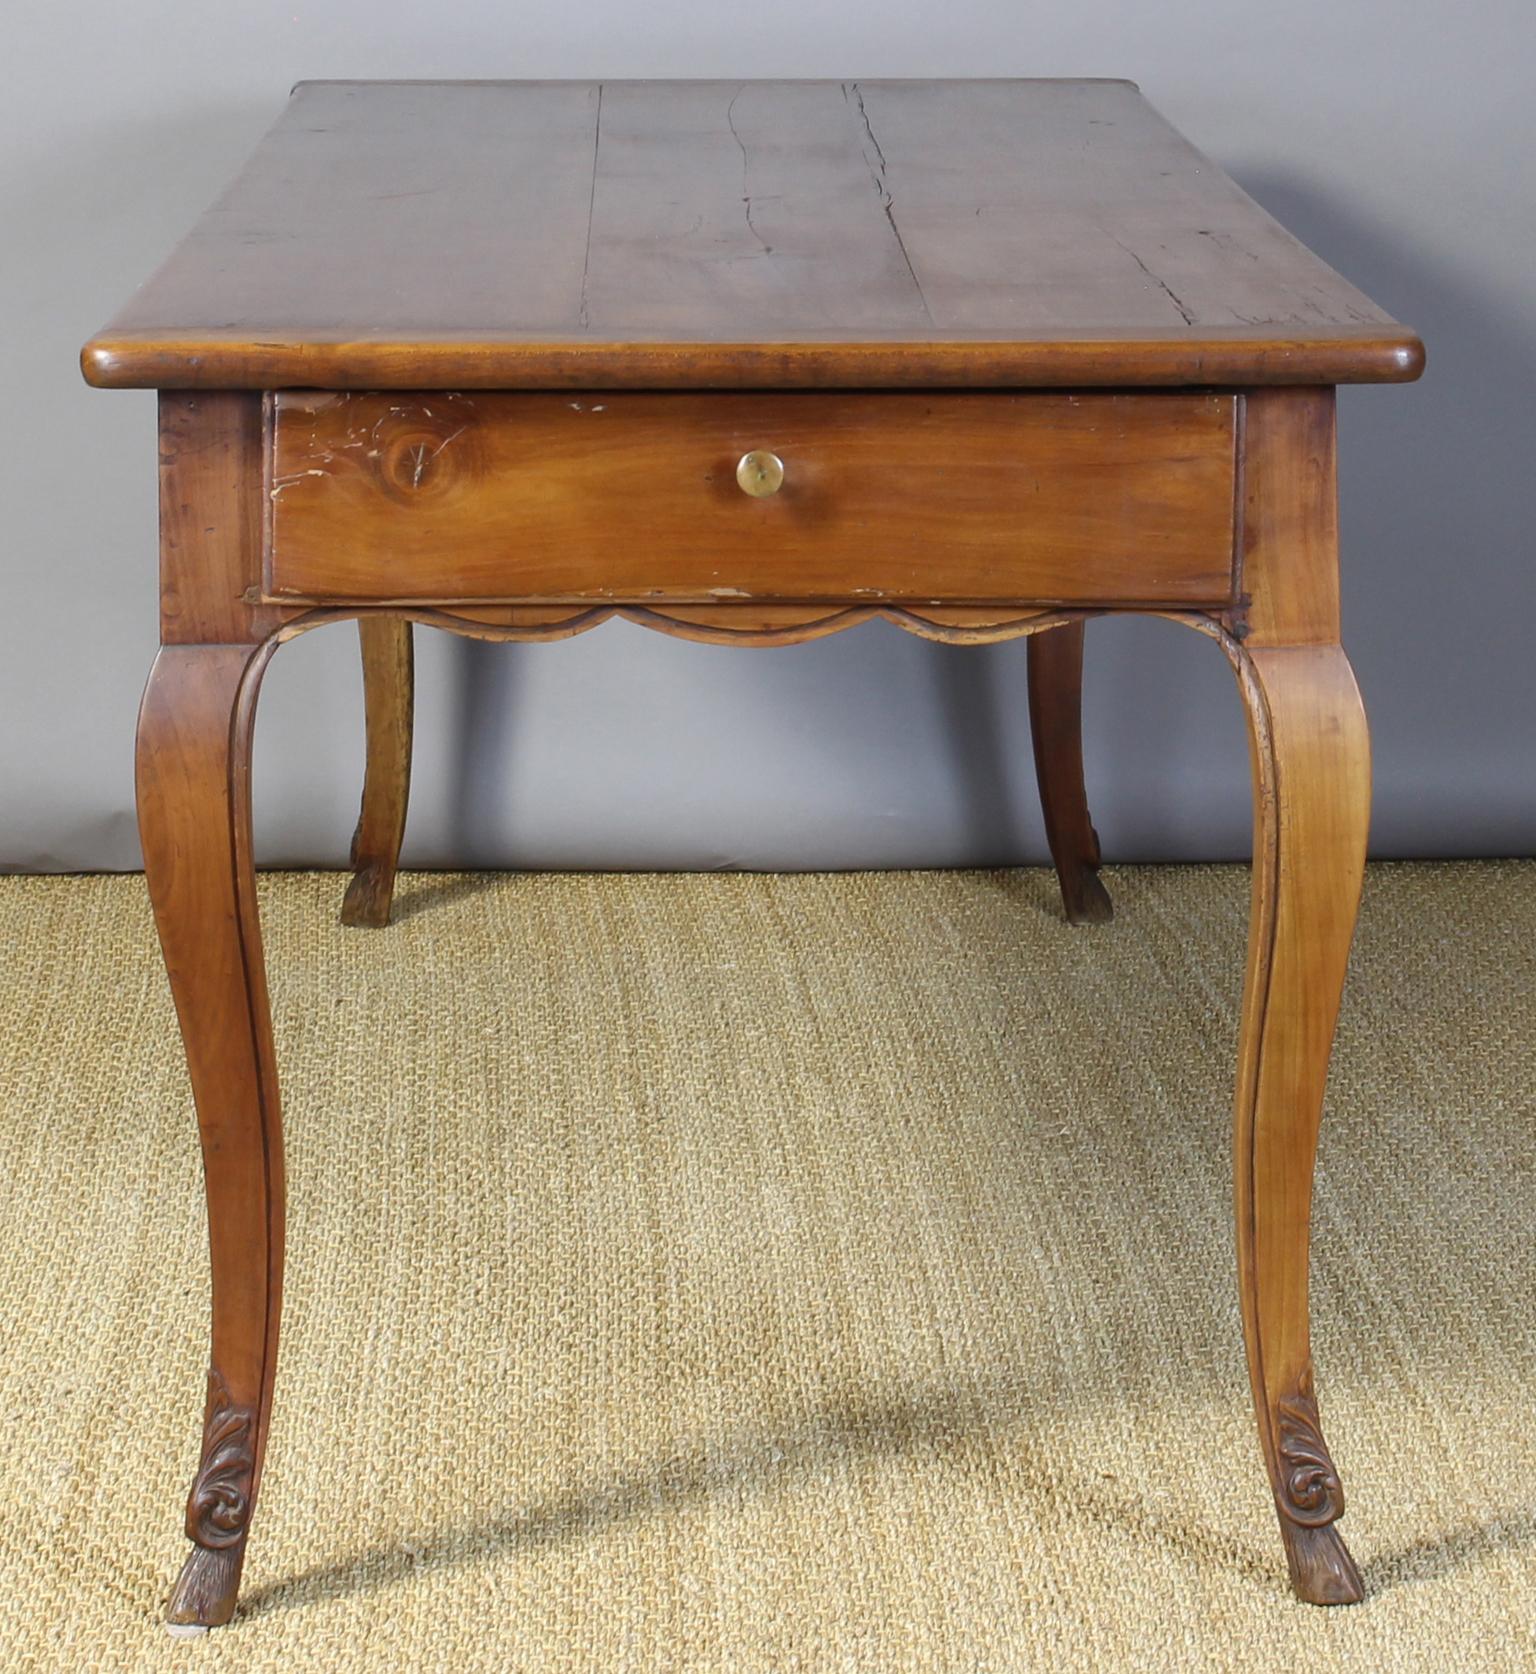 French Provincial Early 19th Century French Cherrywood Farm Table